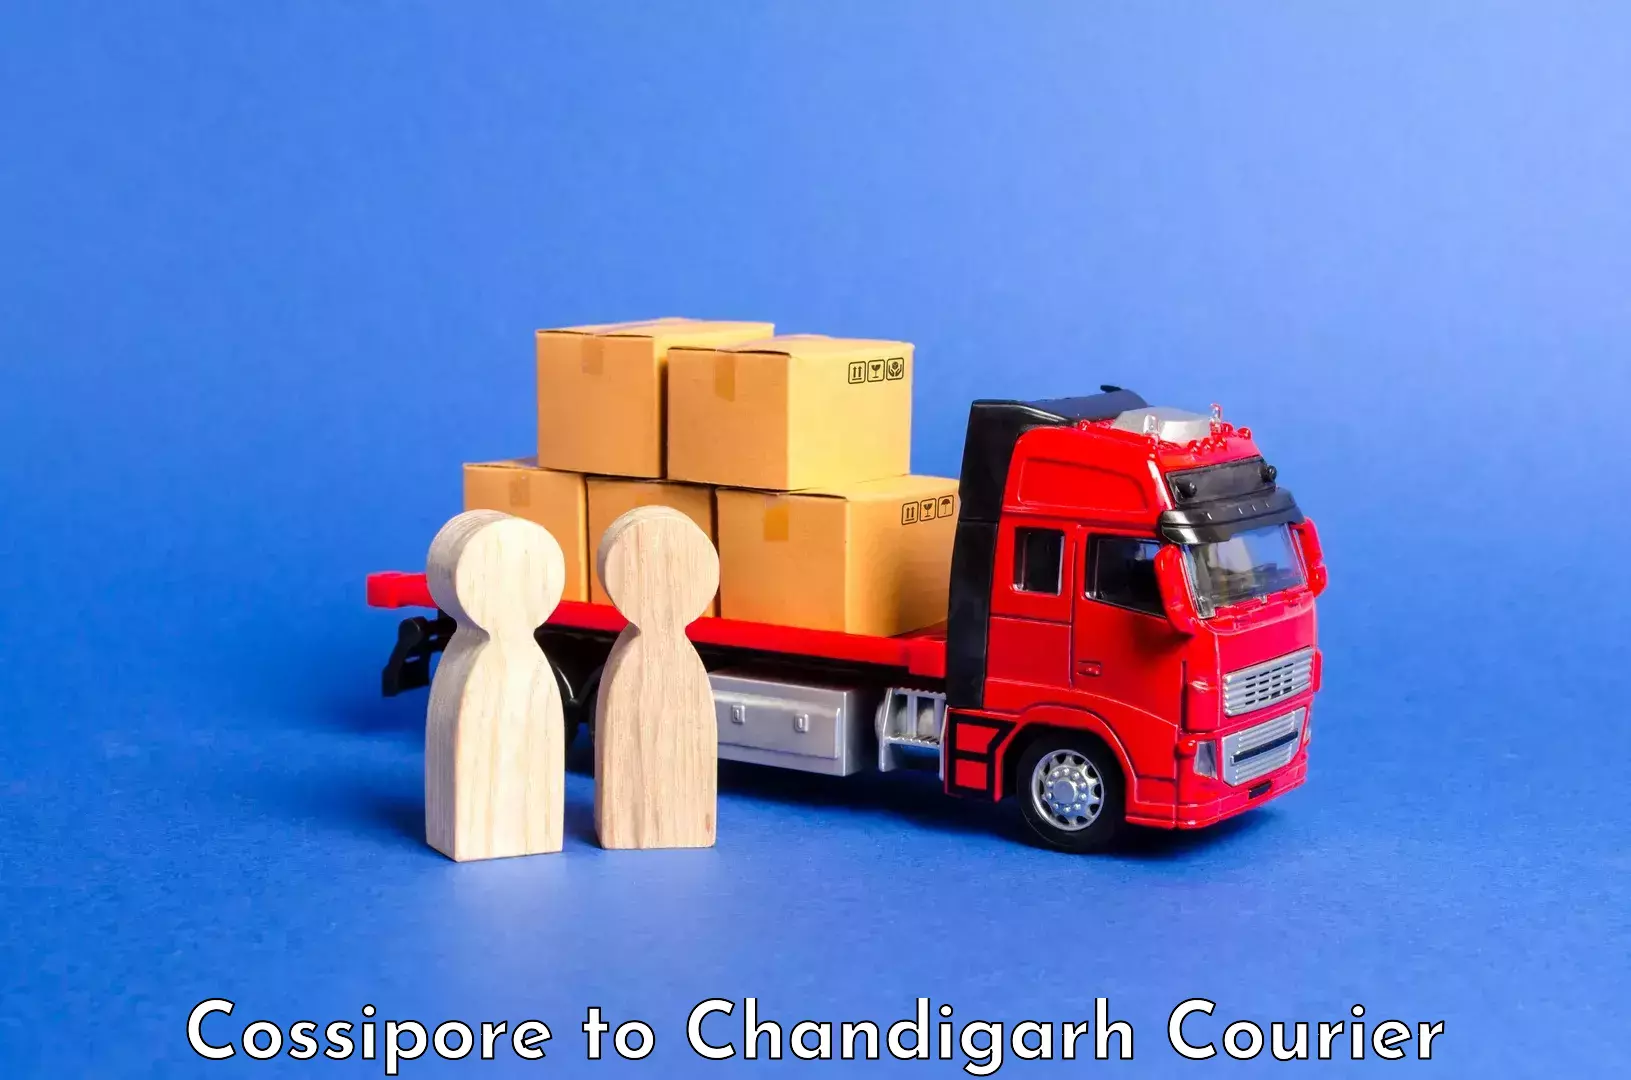 Luggage delivery system Cossipore to Chandigarh